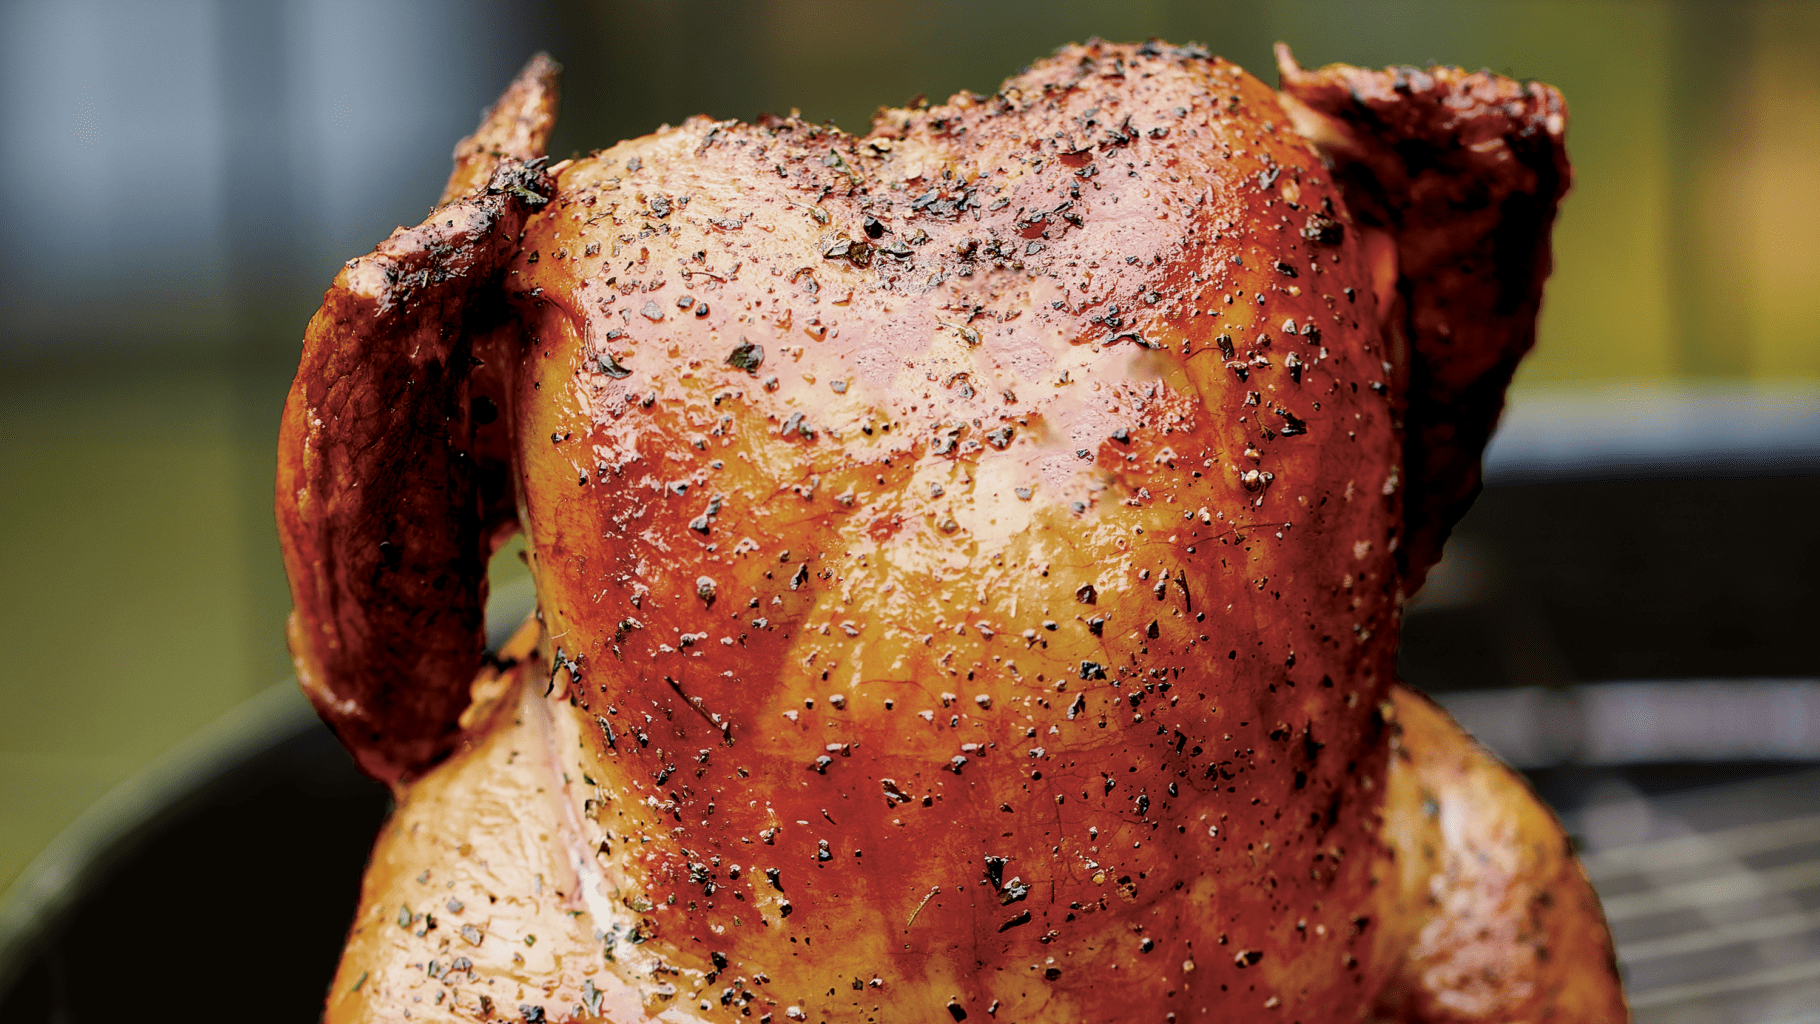 Basic Beer-Can Chicken recipe from Beer-Can Chicken by Steven Raichlen.